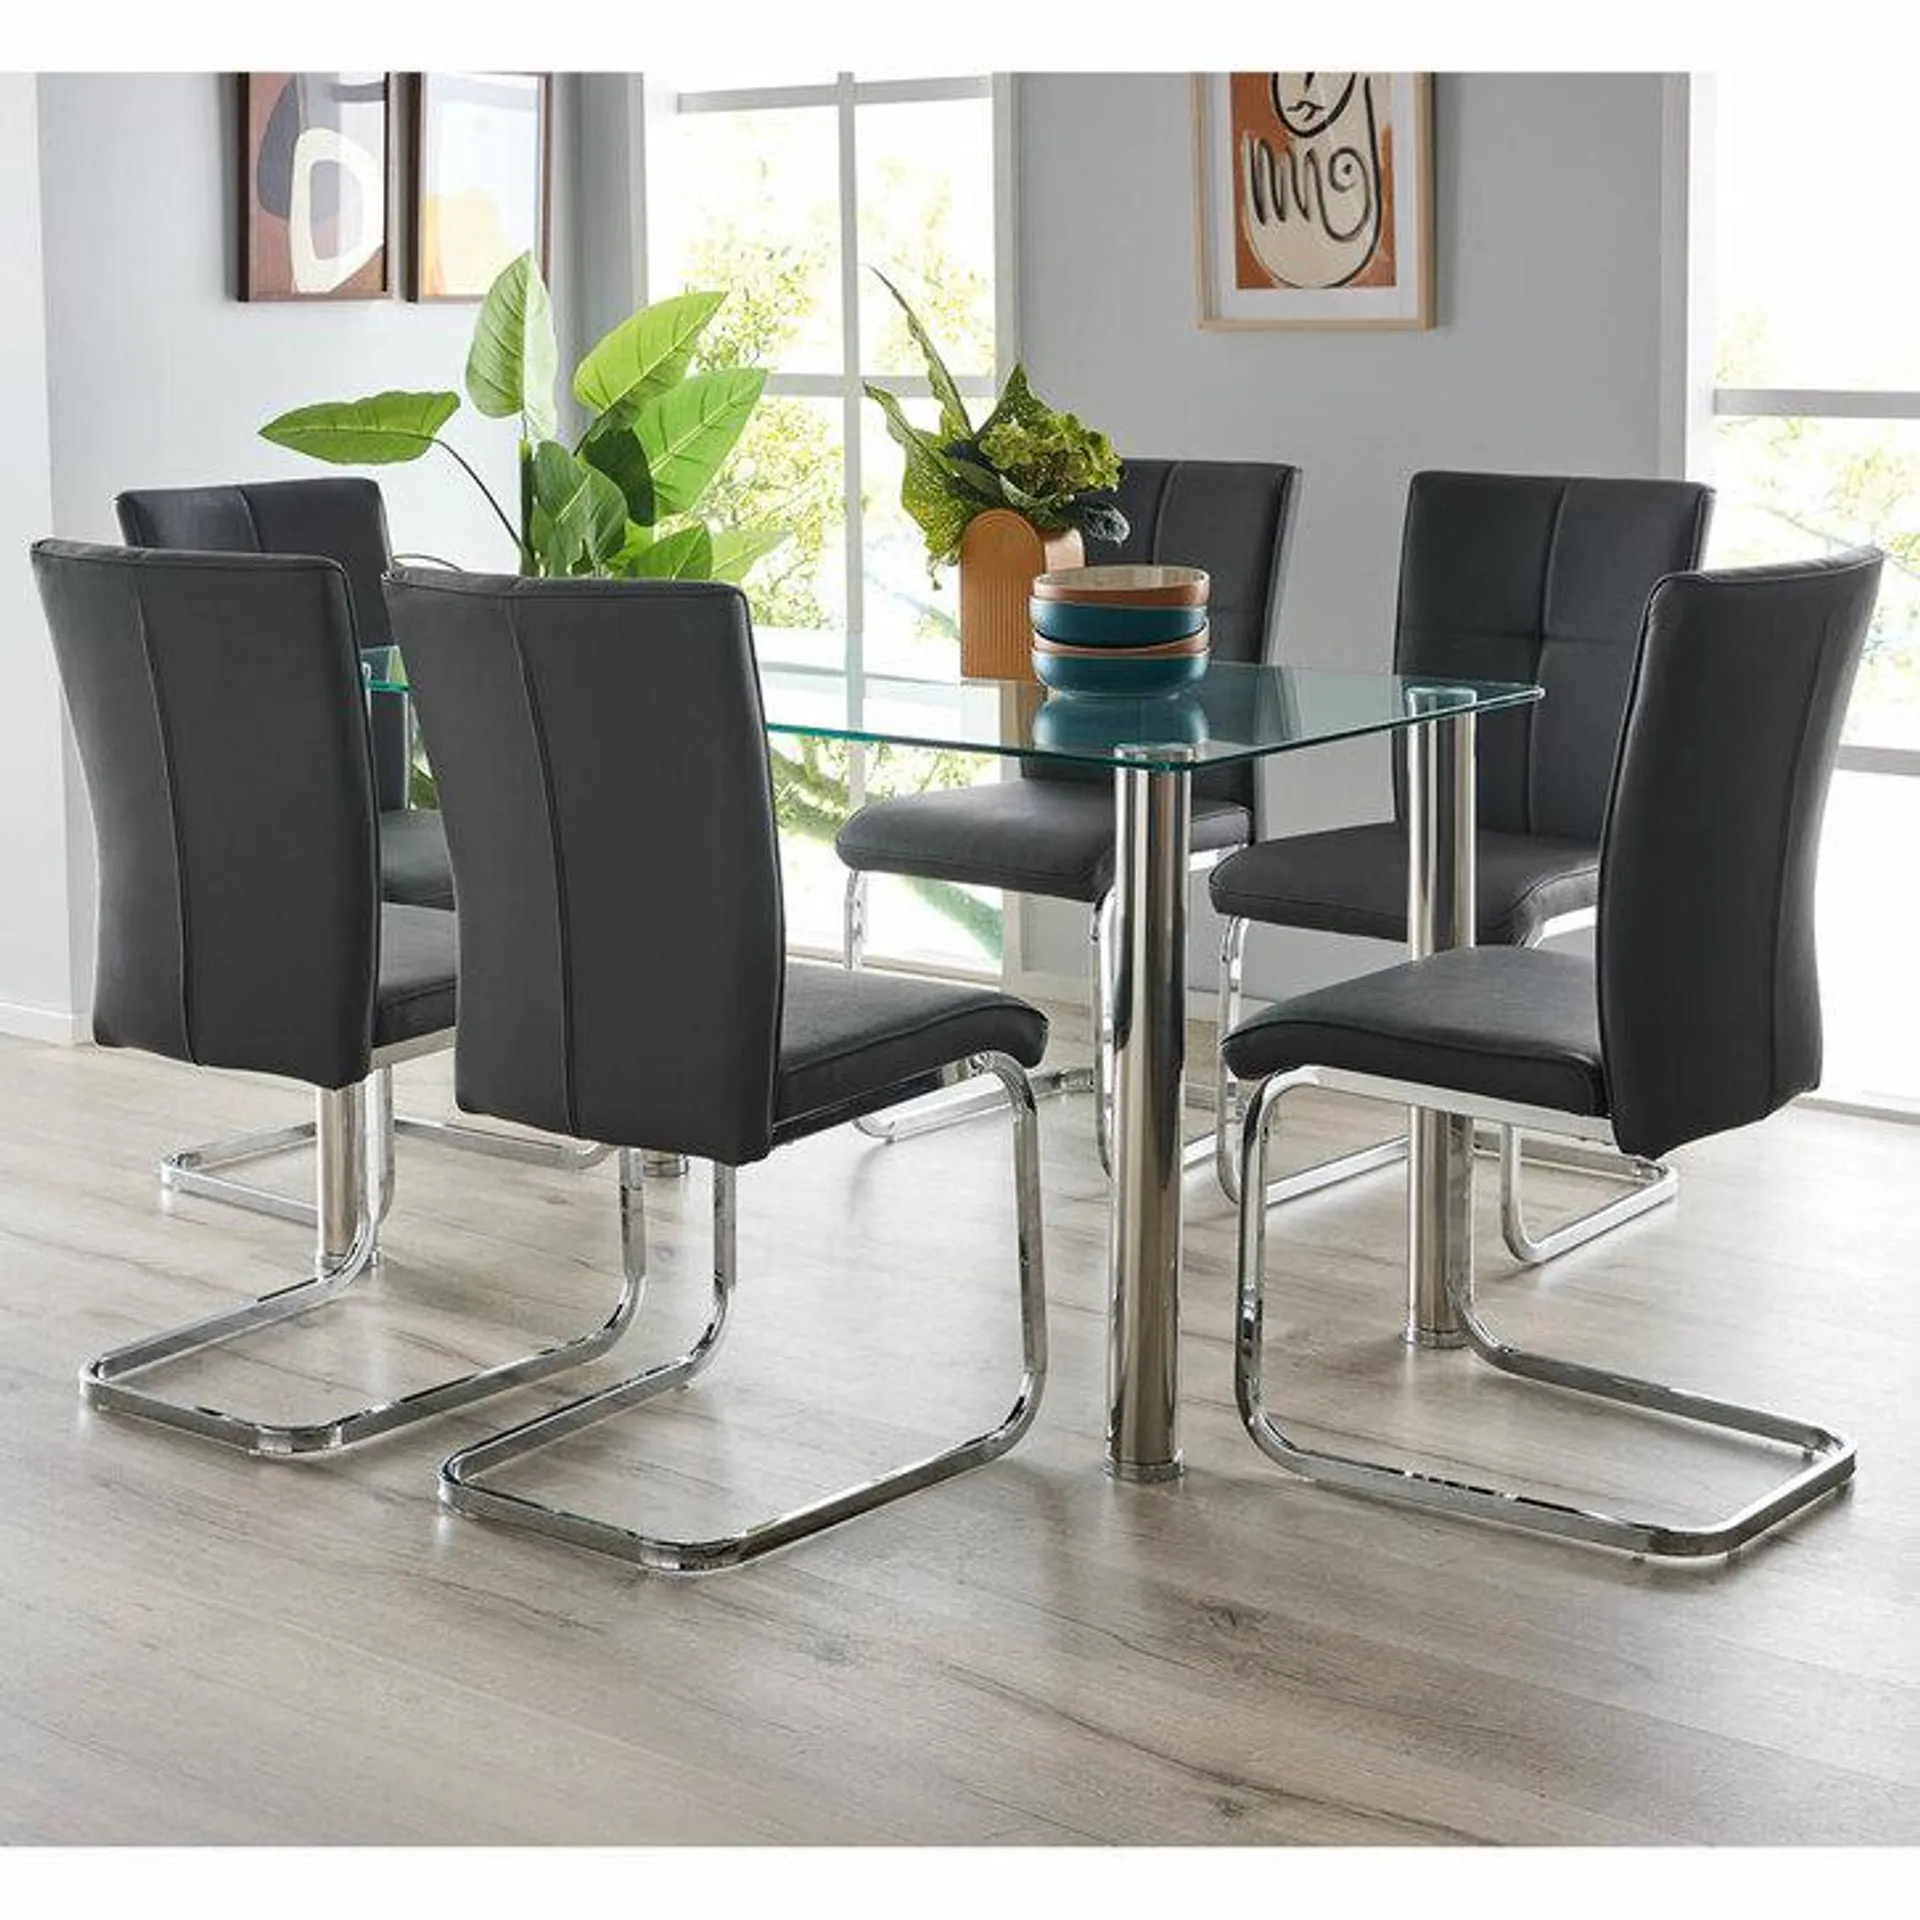 Zoe 6 Seater Dining Set With Flint Chairs